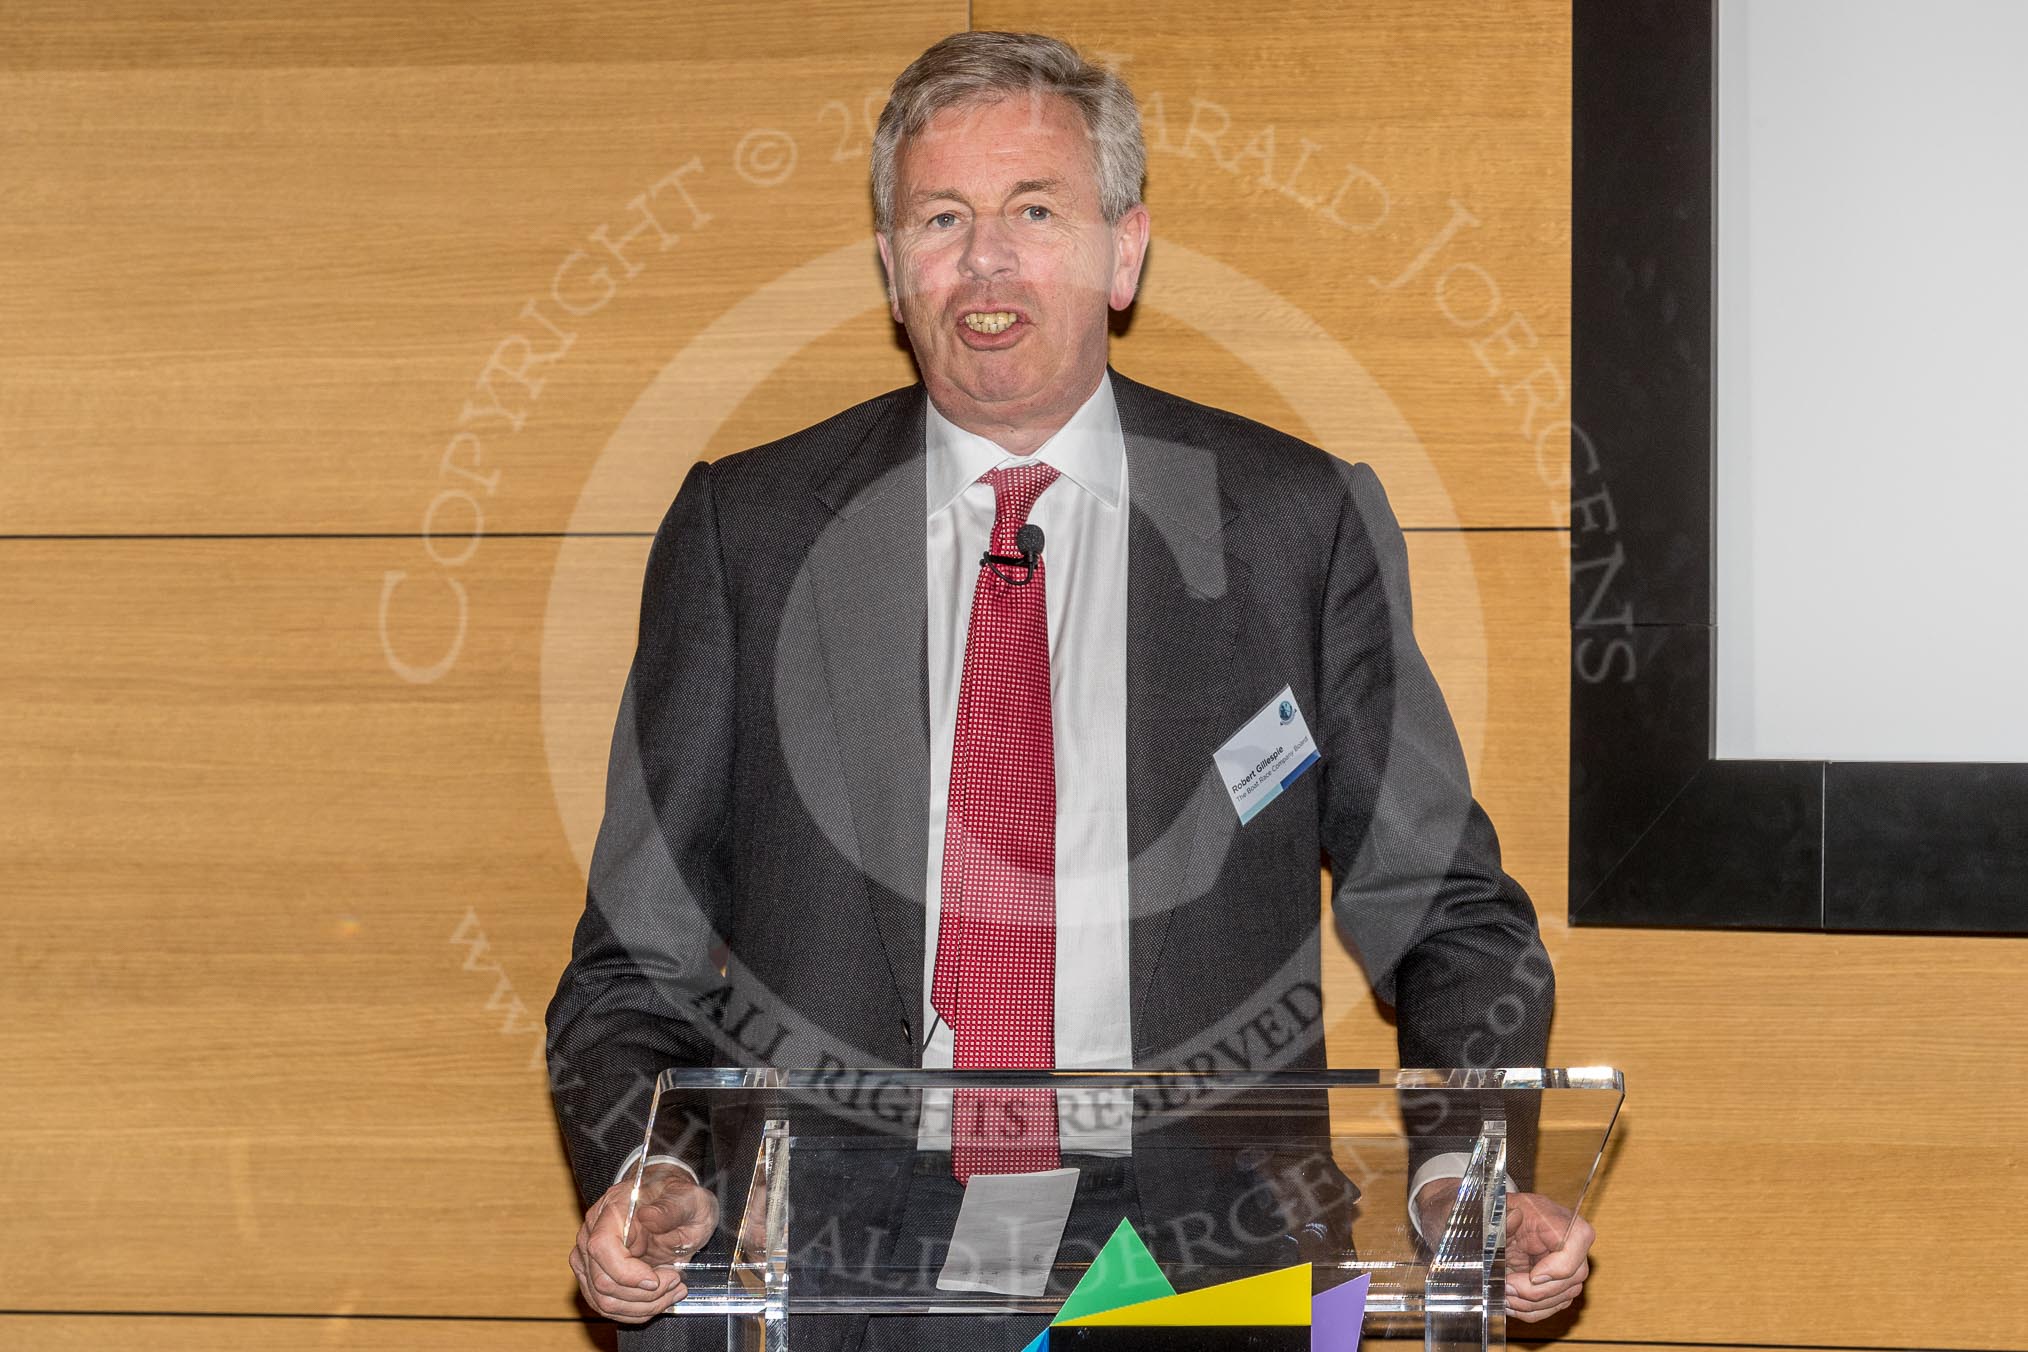 The Boat Race season 2017 - Crew Announcement and Weigh-In: Robert Gillespie, Chairman of The Boat Race Company, thanking all the Boat Races sponsors for their support..
The Francis Crick Institute,
London NW1,

United Kingdom,
on 14 March 2017 at 11:13, image #5